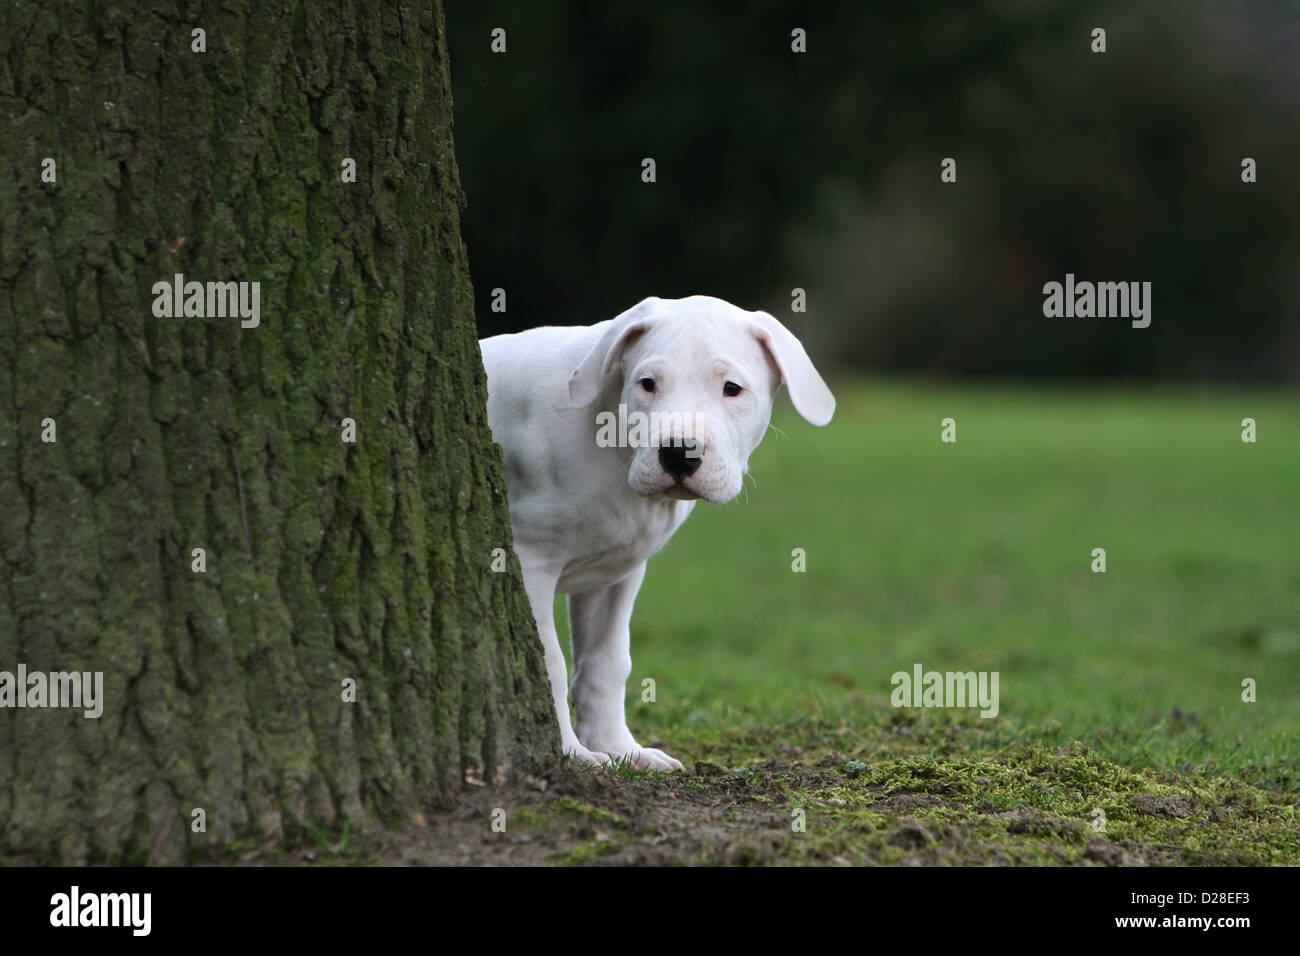 Dog Dogo Argentino / Dogue Argentin (natural ears) puppy behind a tree Stock Photo